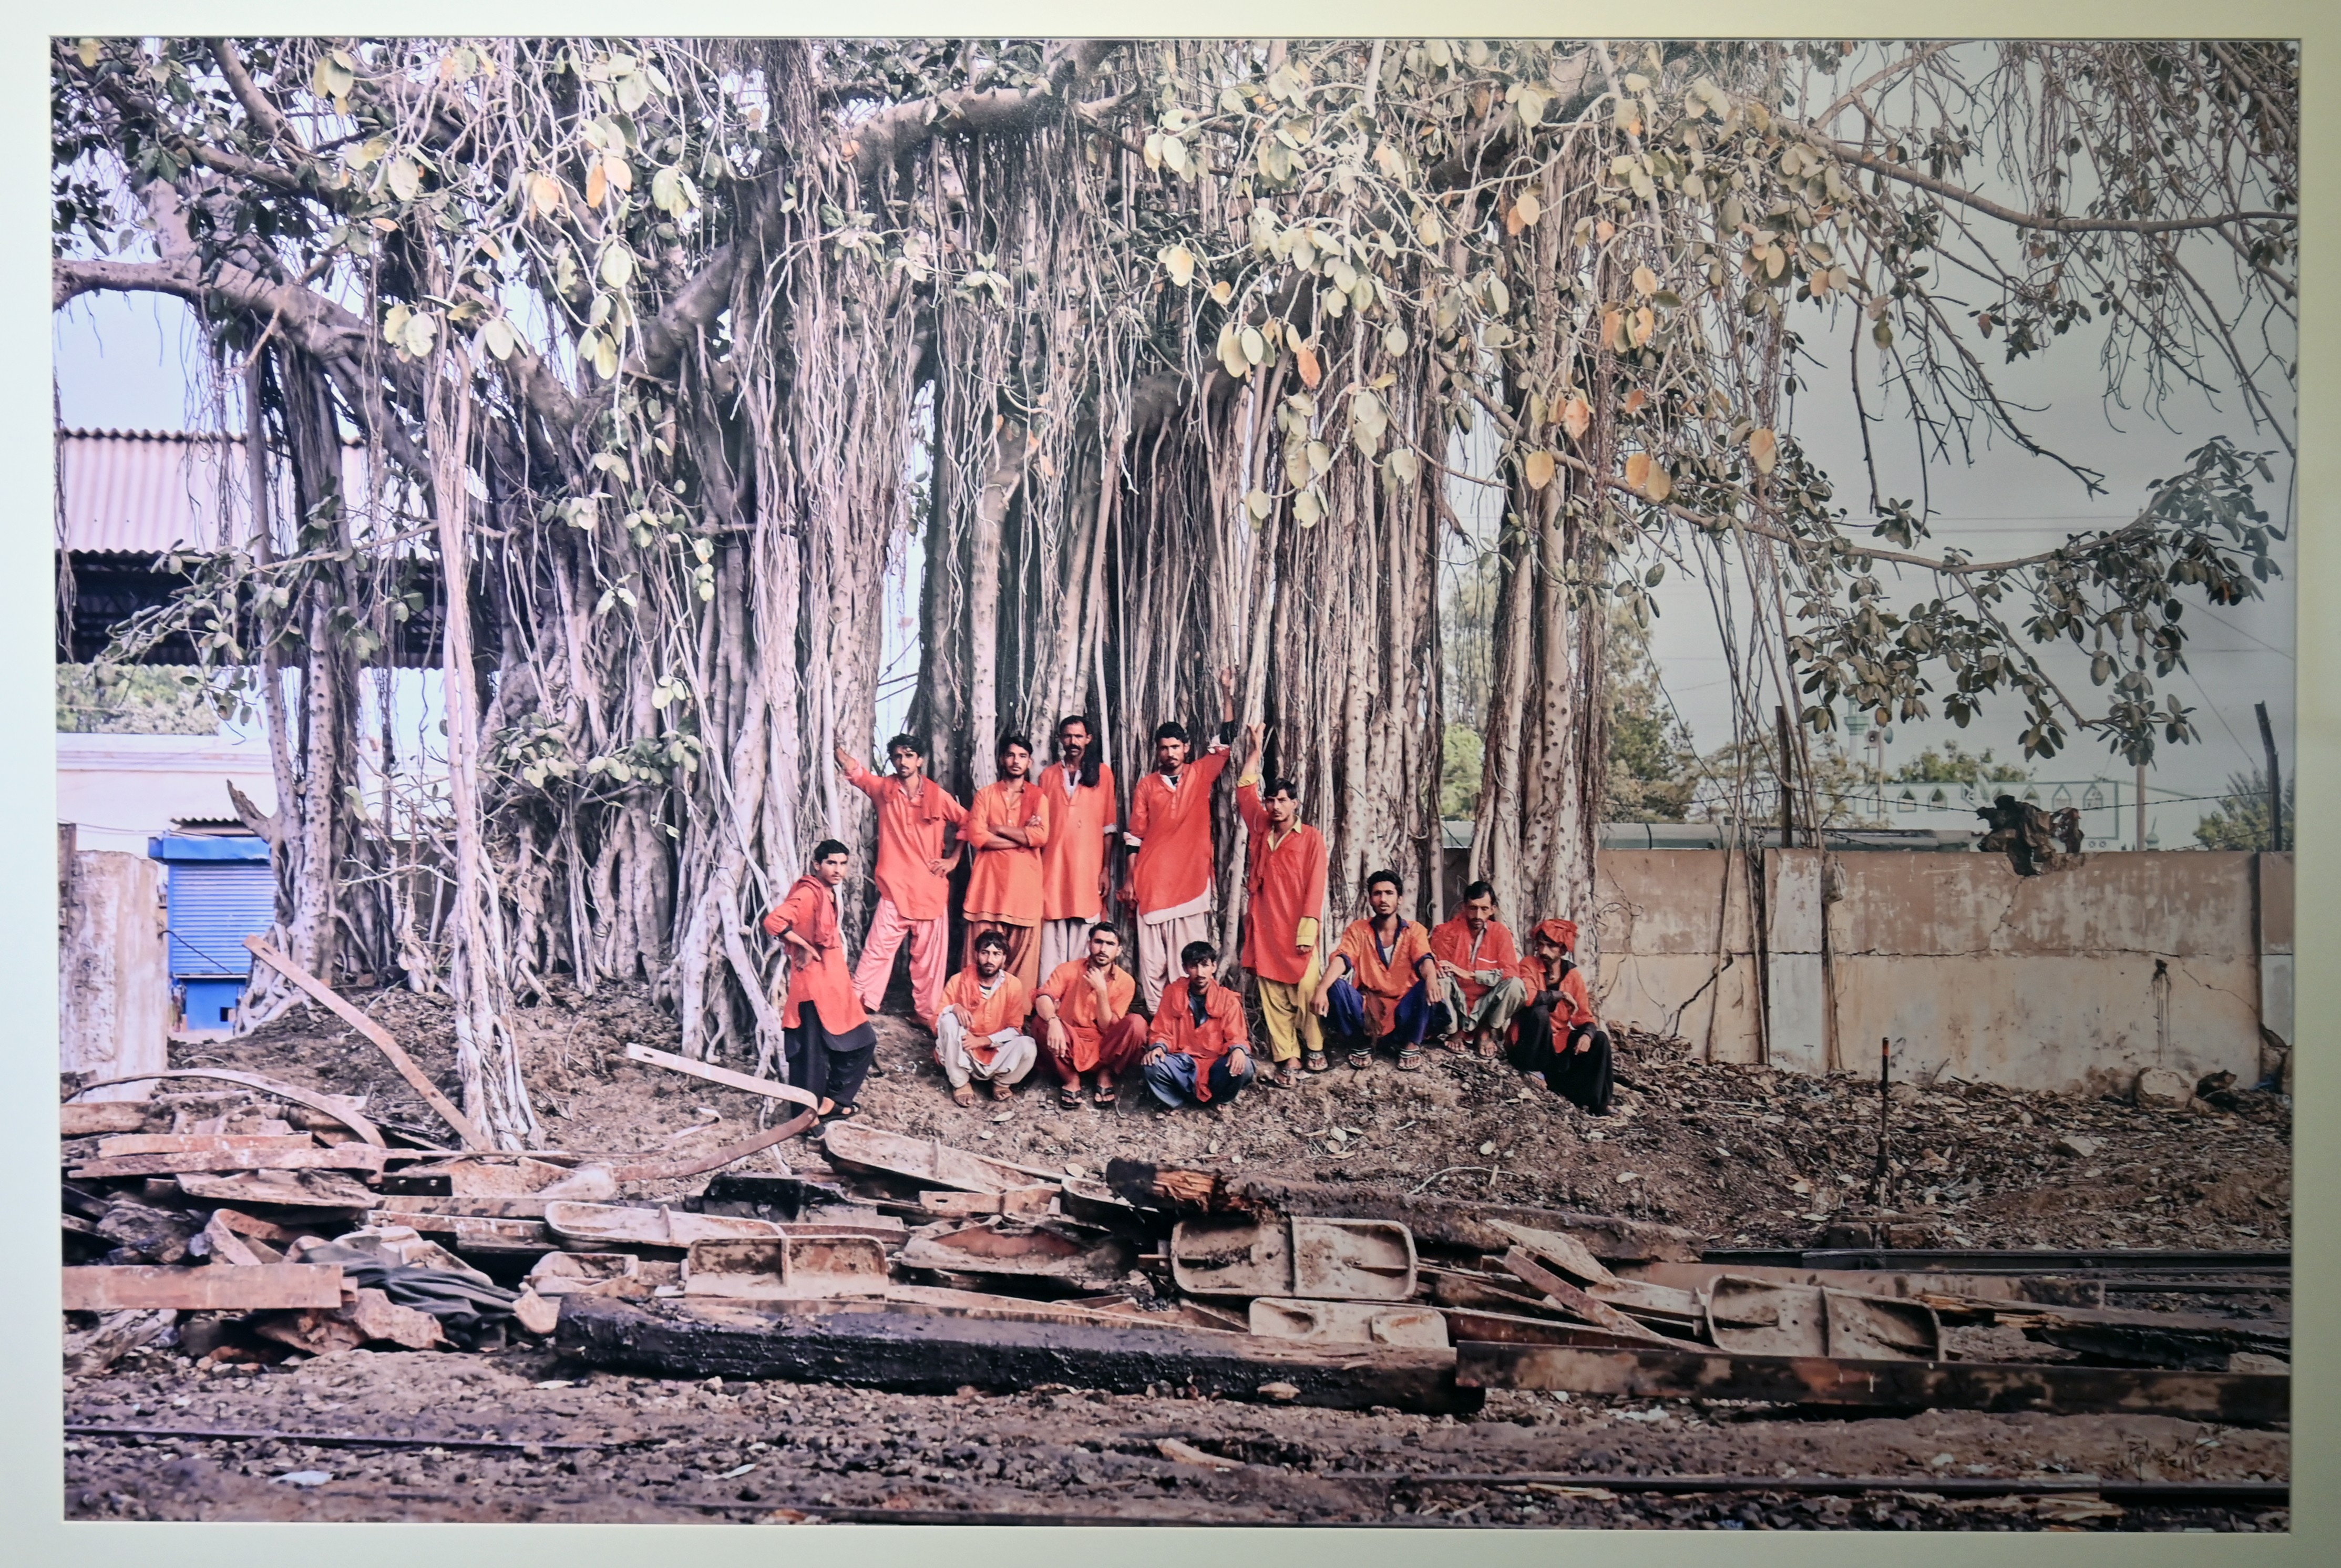 A group photo of Coolie, term used for low-wage labourers, working mainly at the railway station